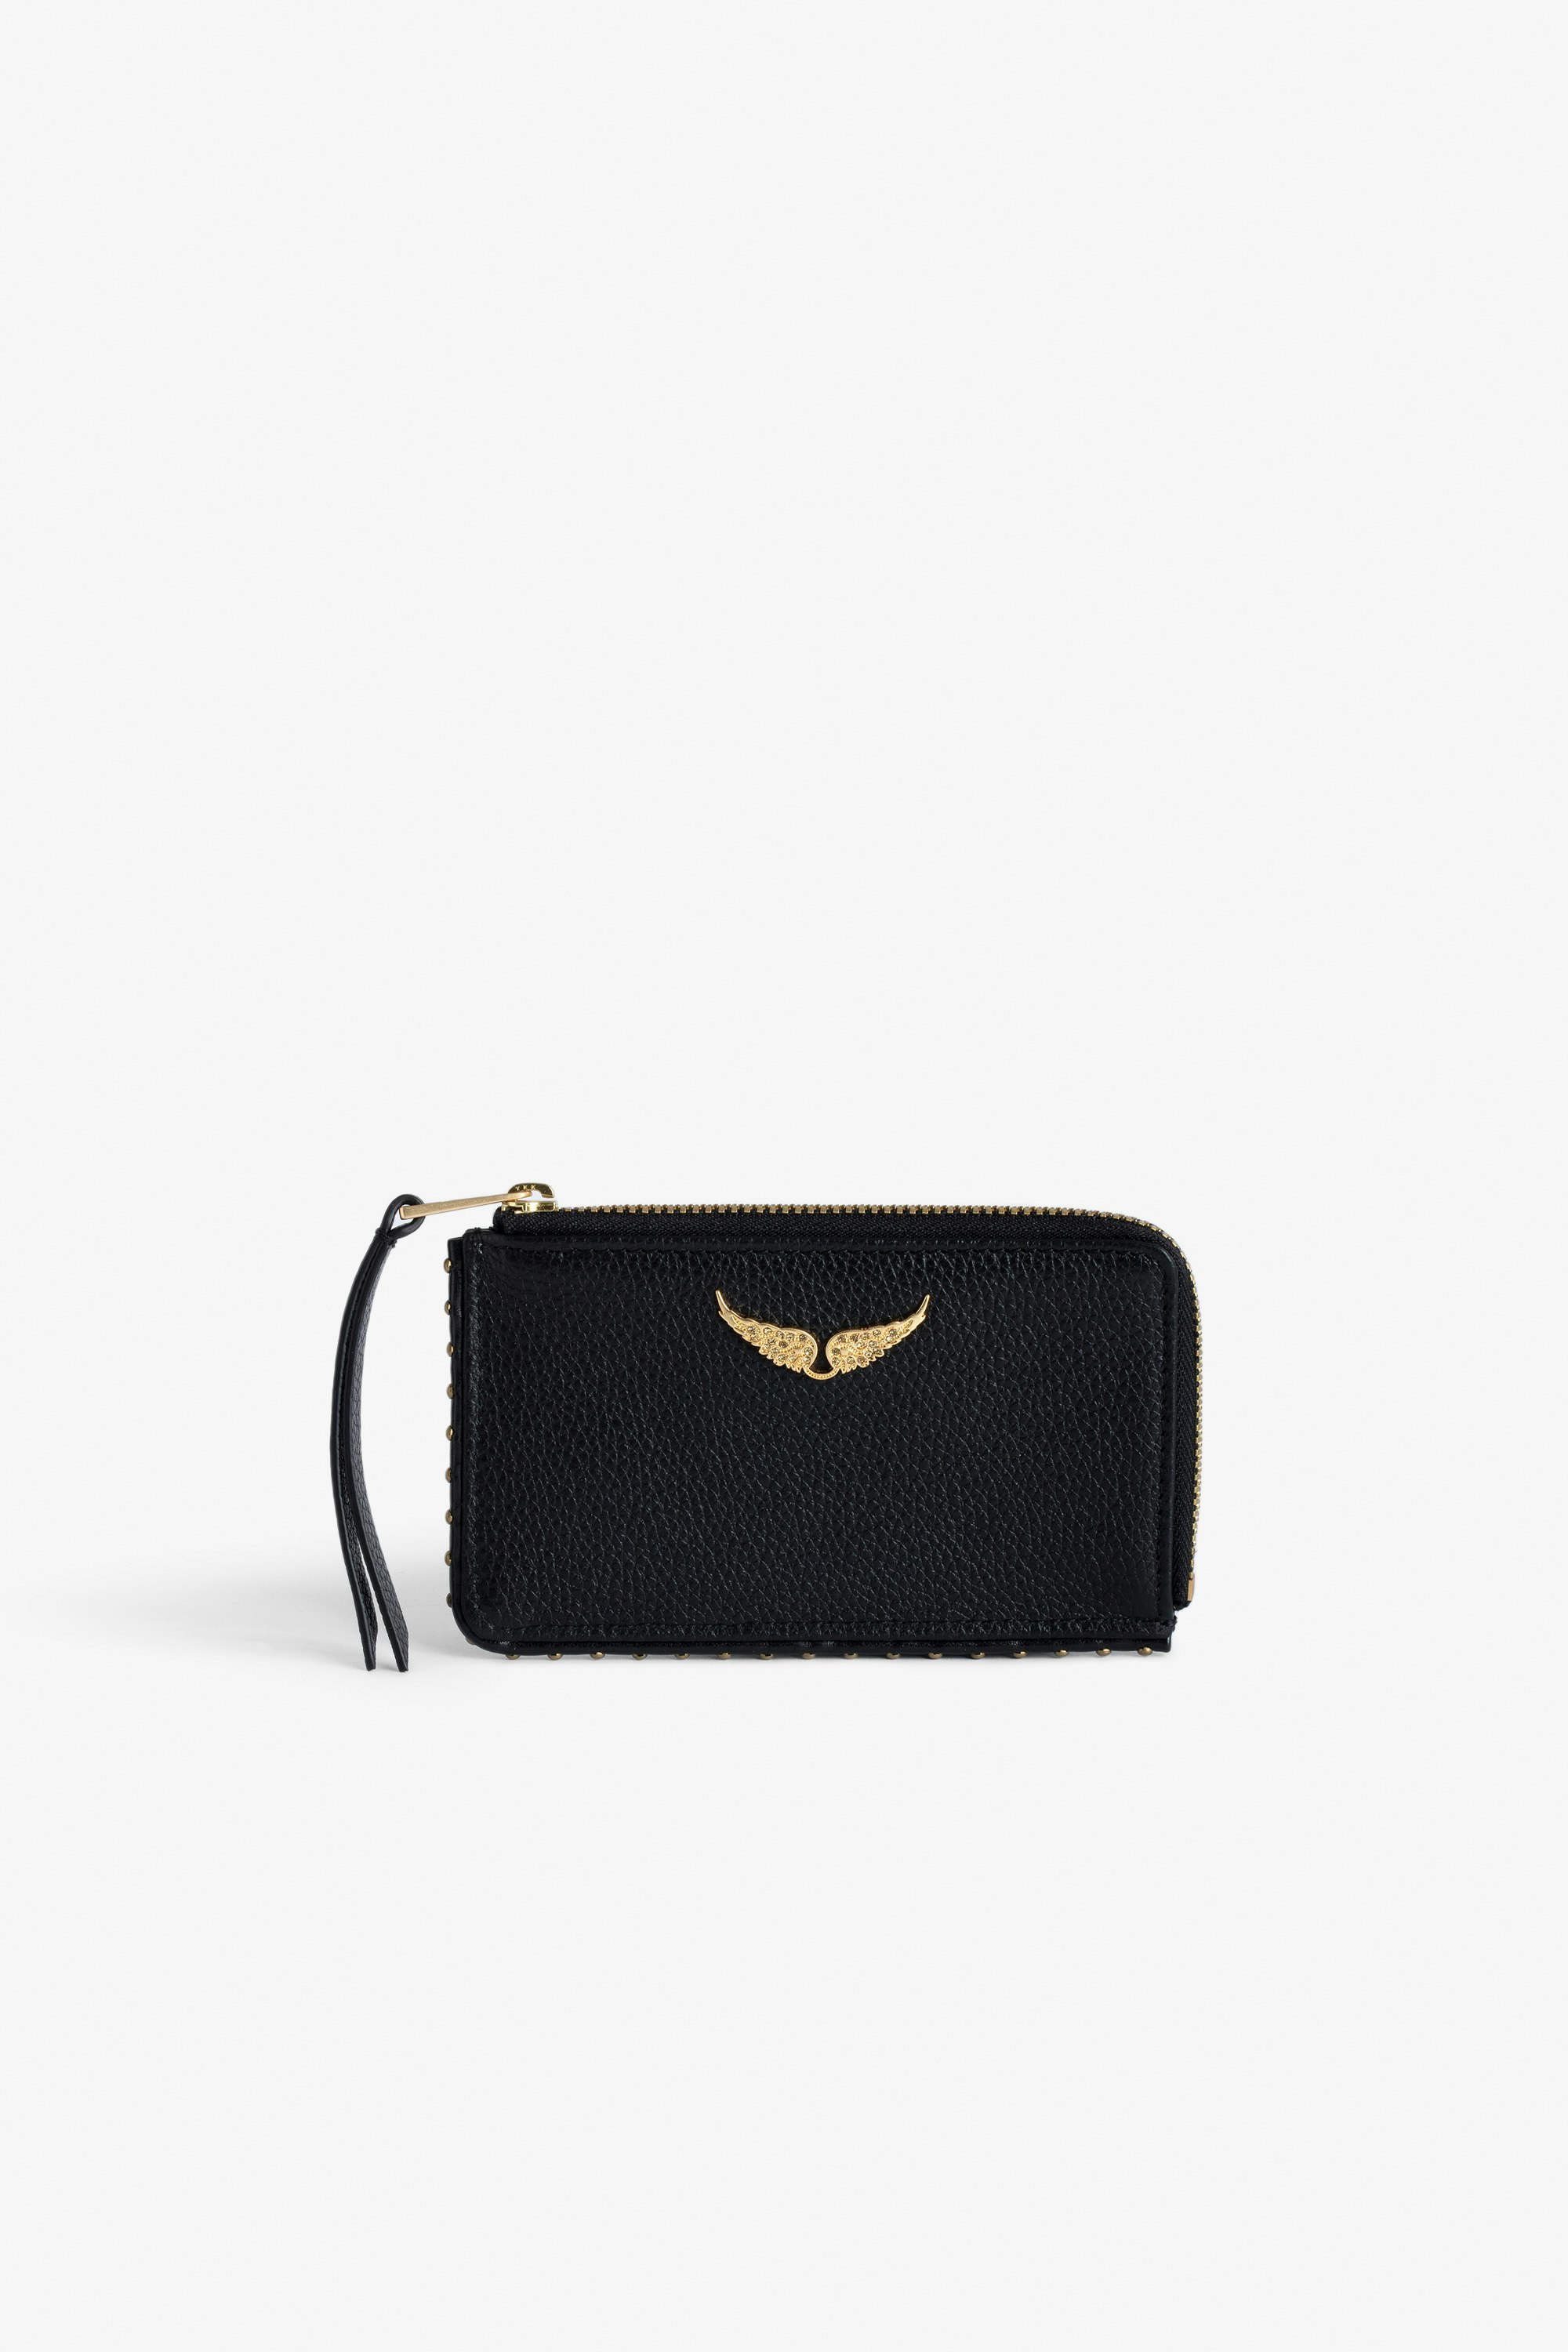 Porte-Cartes ZV Card - Women’s black grained leather card holder with studded trim and wings charm.